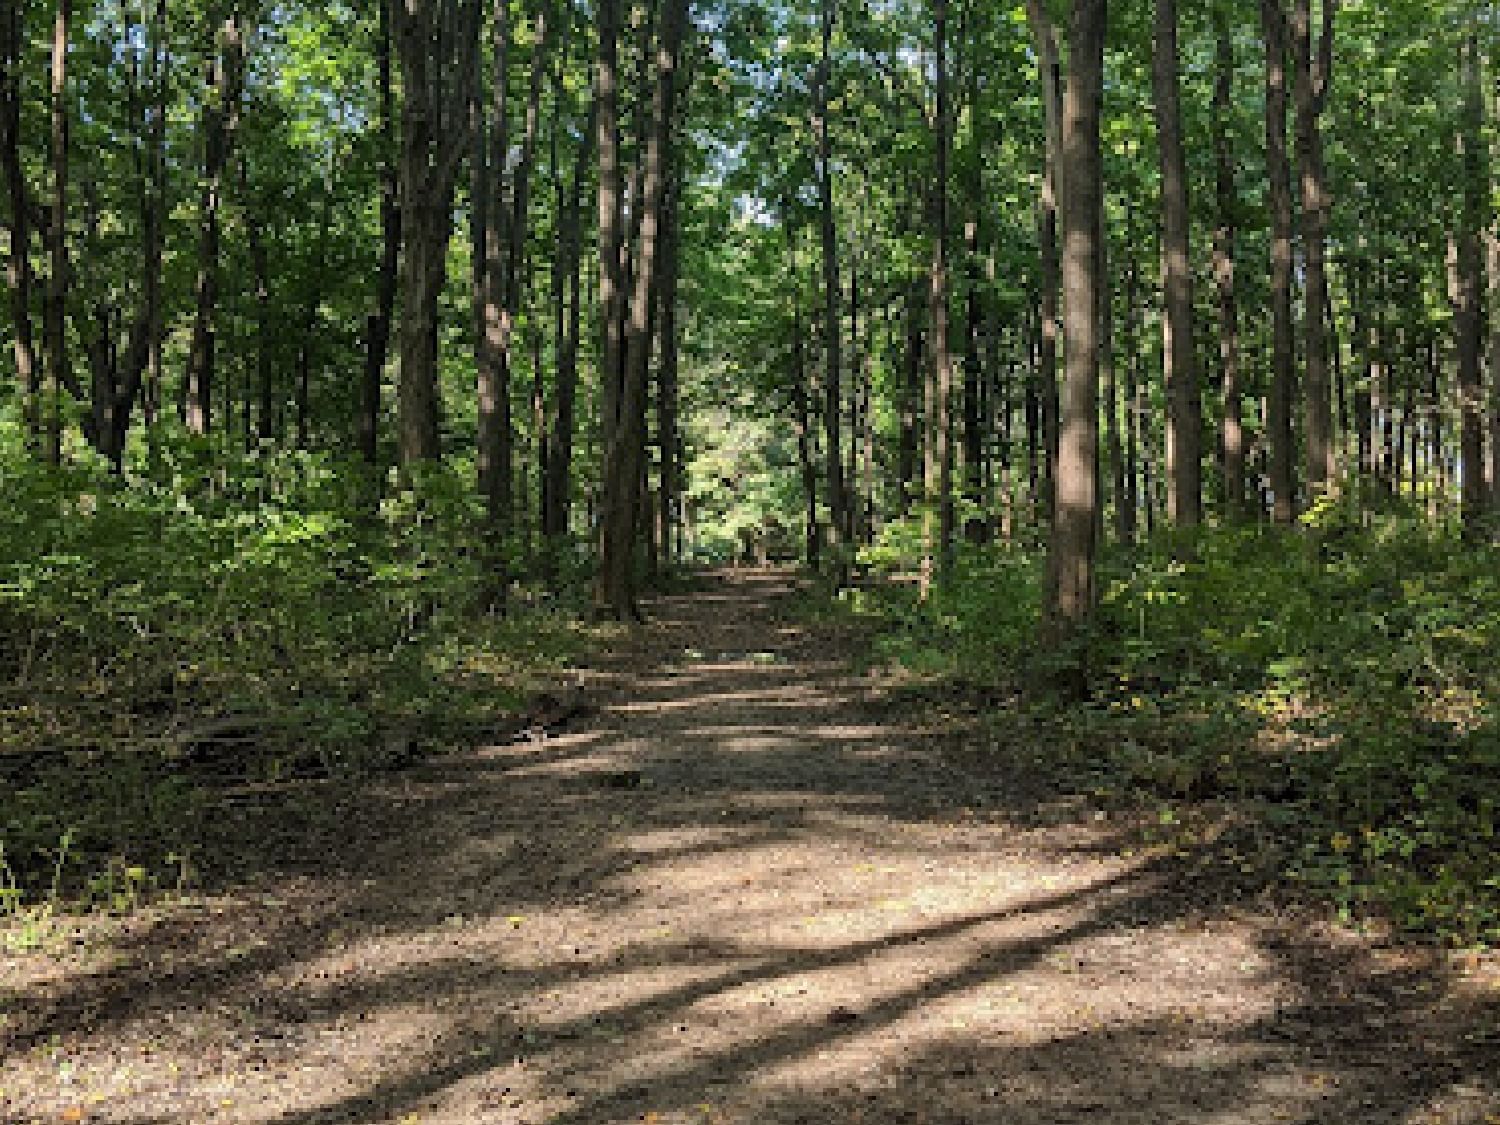 Forest pathway by O’Neil Nature Preserve near Retro Suites Hotel